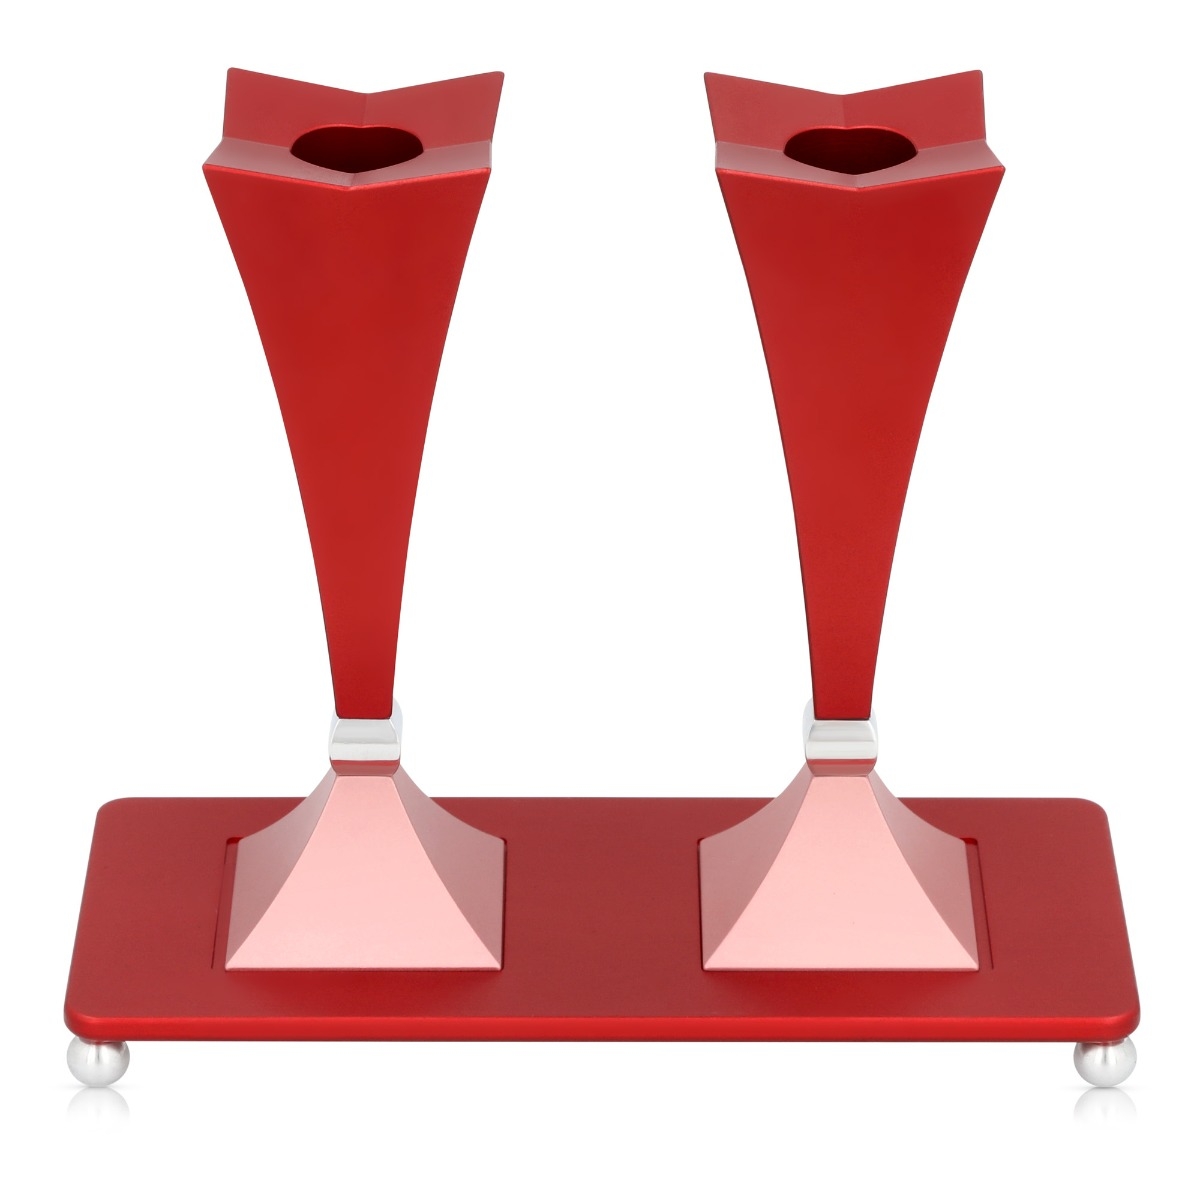 Three-Part Shabbat Candlesticks Set With Modern Square Design (Choice of Colors) - 2